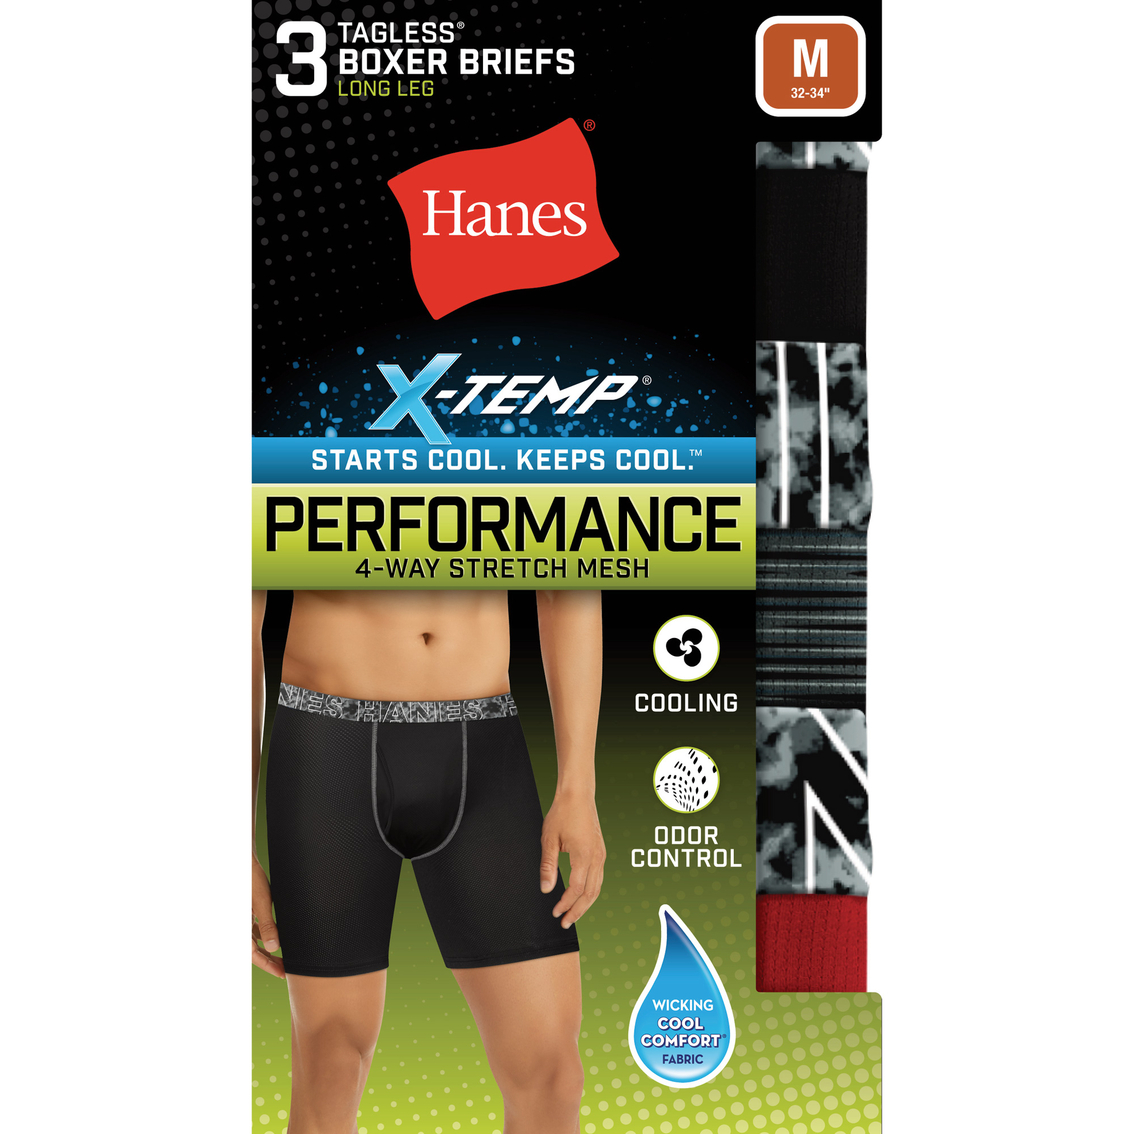 Men's Hanes Tagless Stretch Boxer Briefs – Pearls Helping Pets